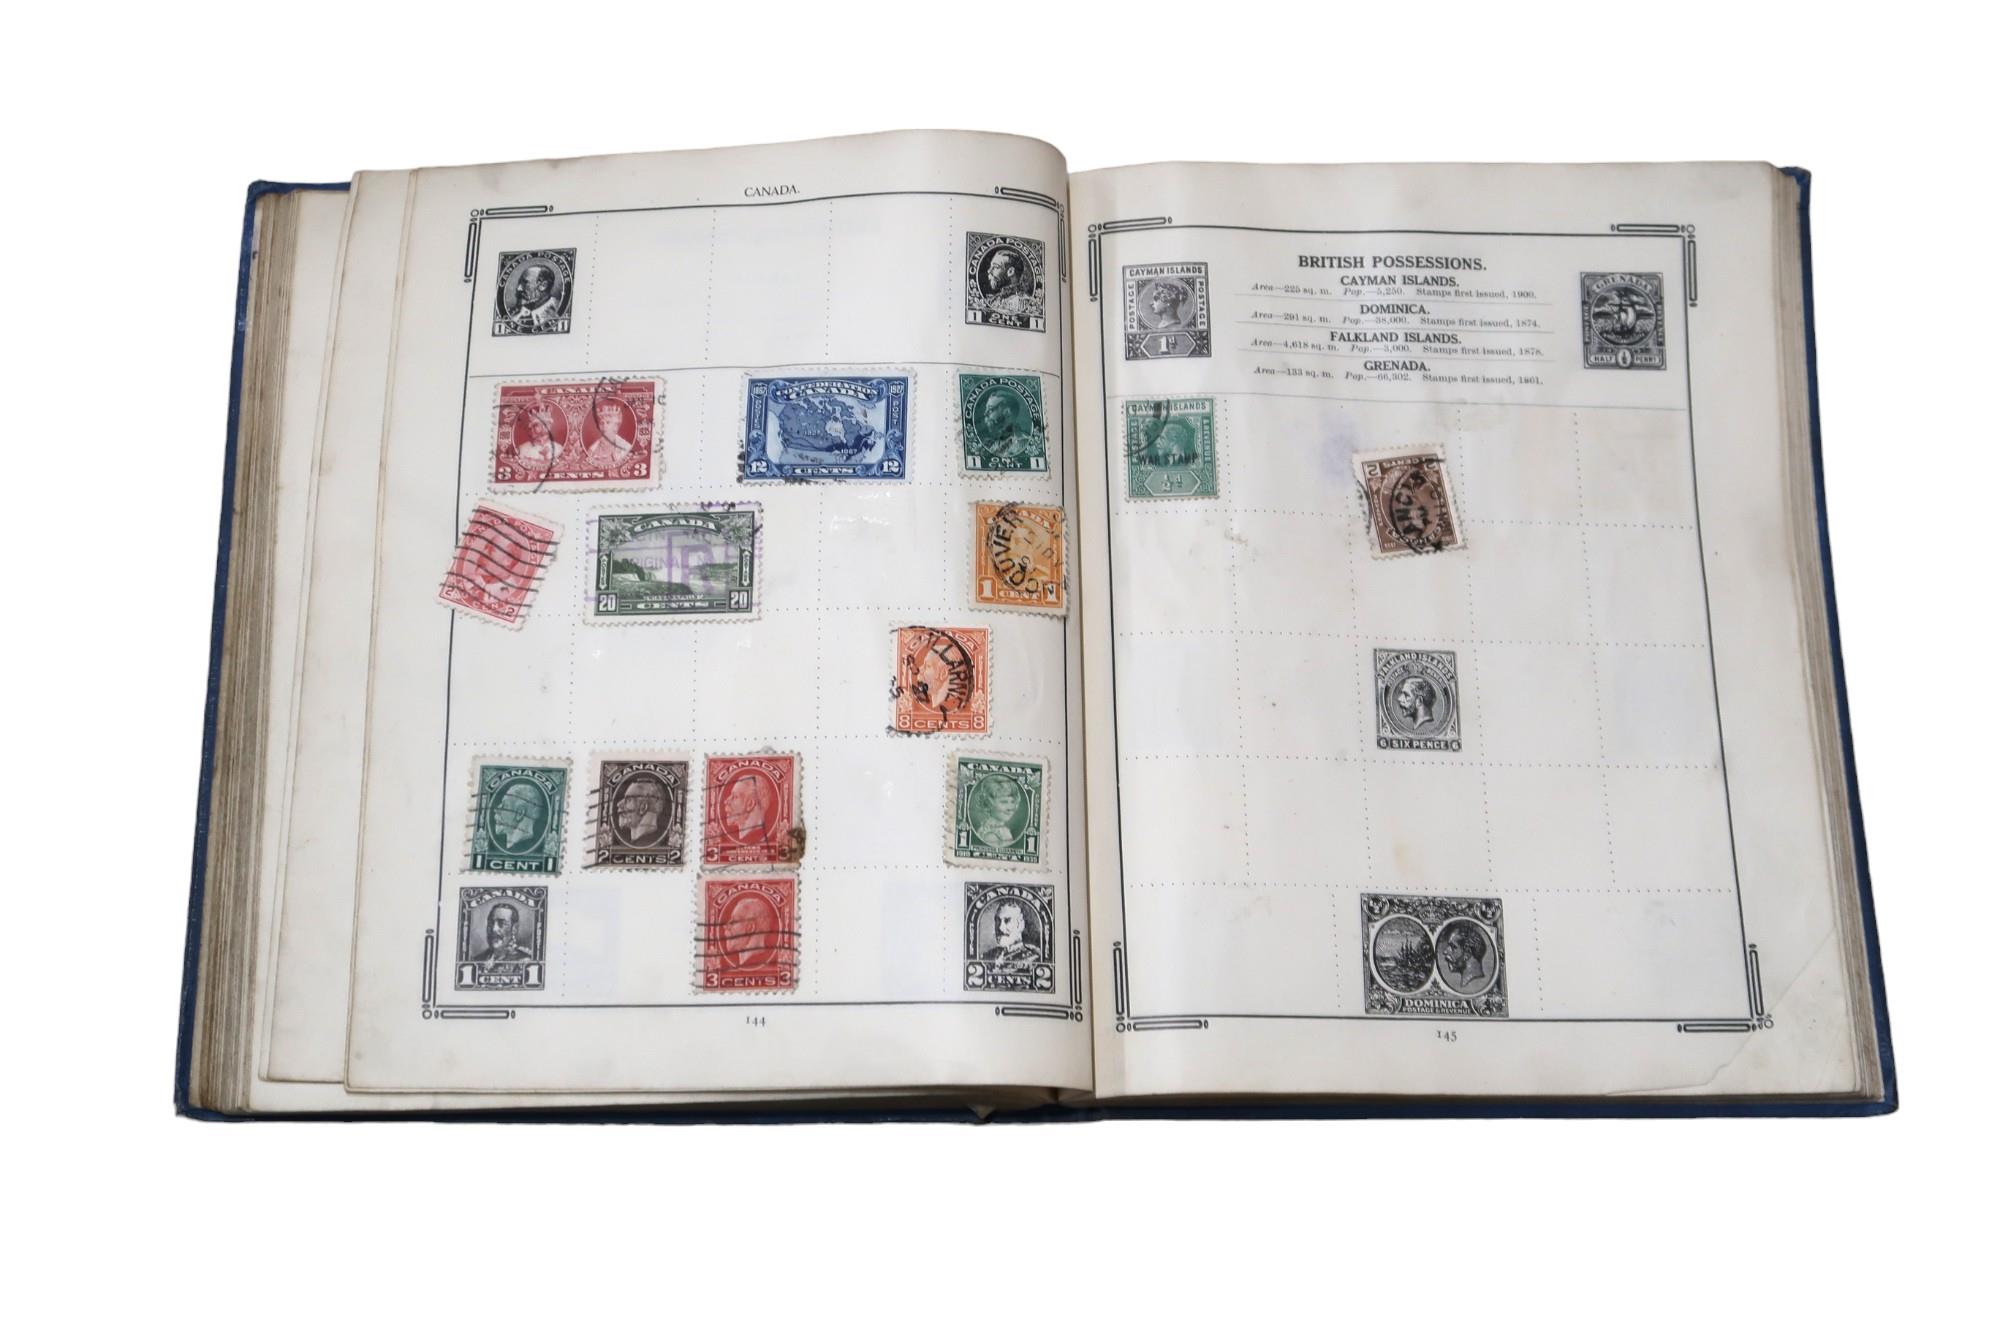 Stanley Gibbons The Improved Stamp Album to include Great Britain 1/d red, 1/d lilac, Victoria 1/ - Image 10 of 20